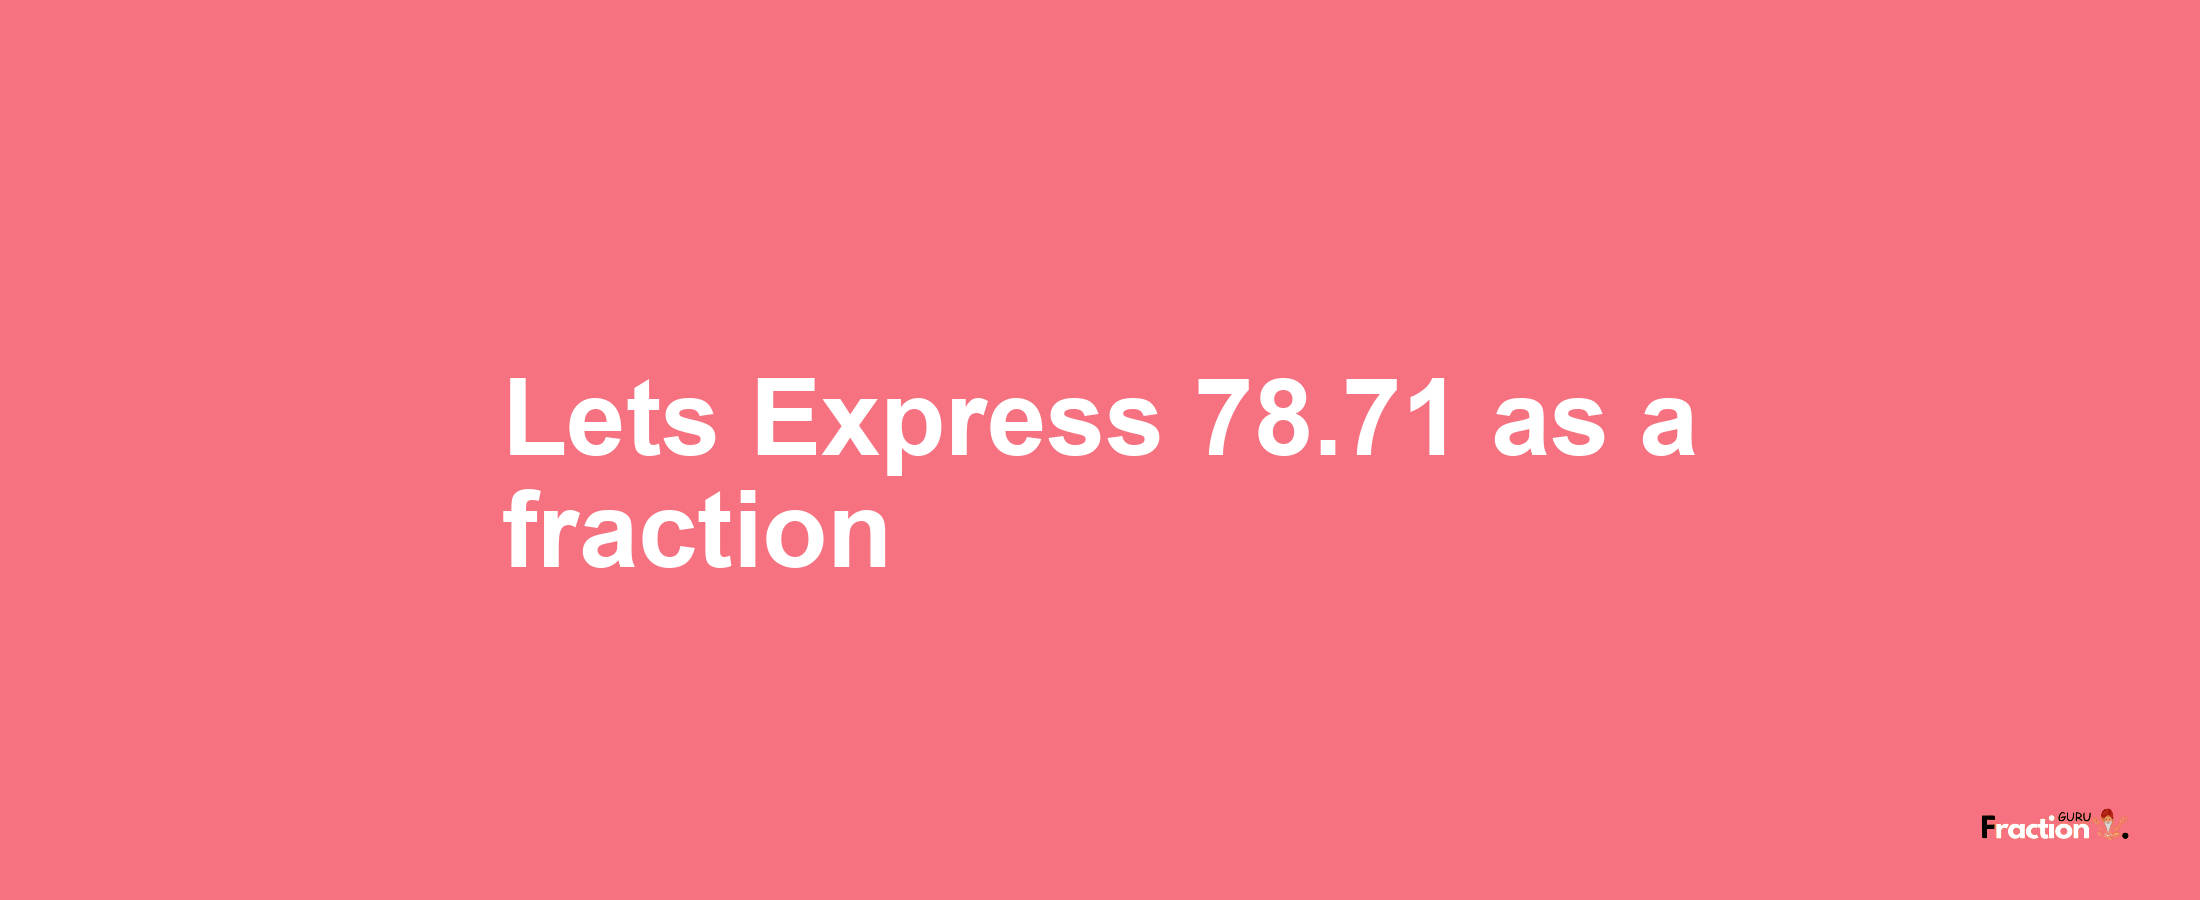 Lets Express 78.71 as afraction